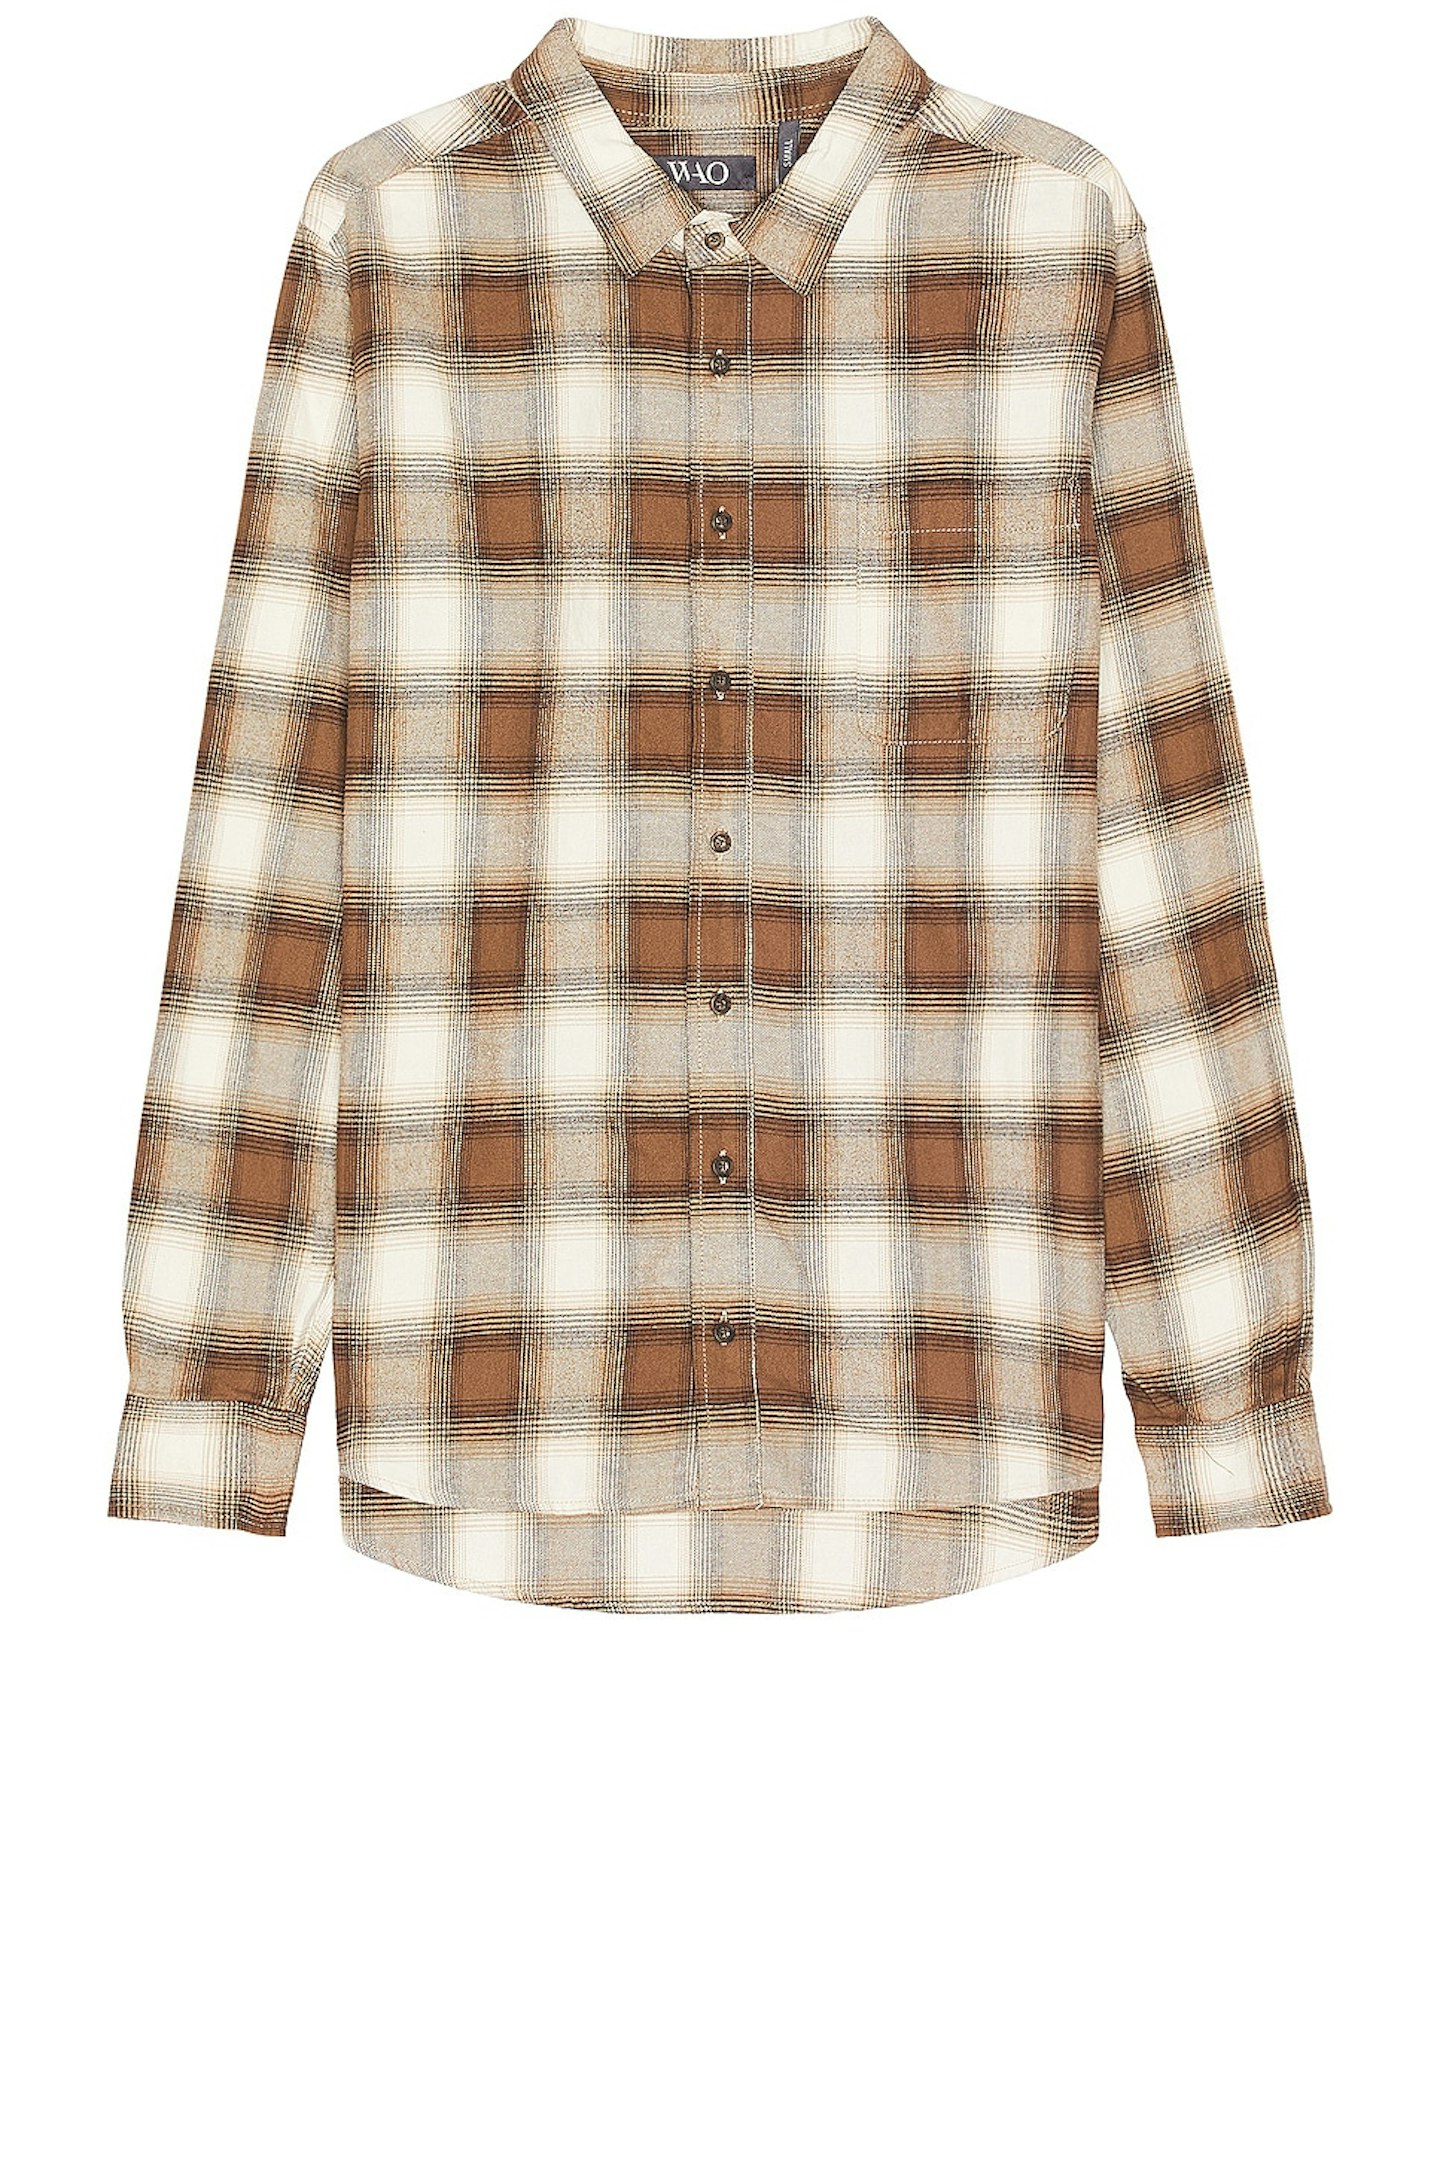 WAO, The Flannel Shirt